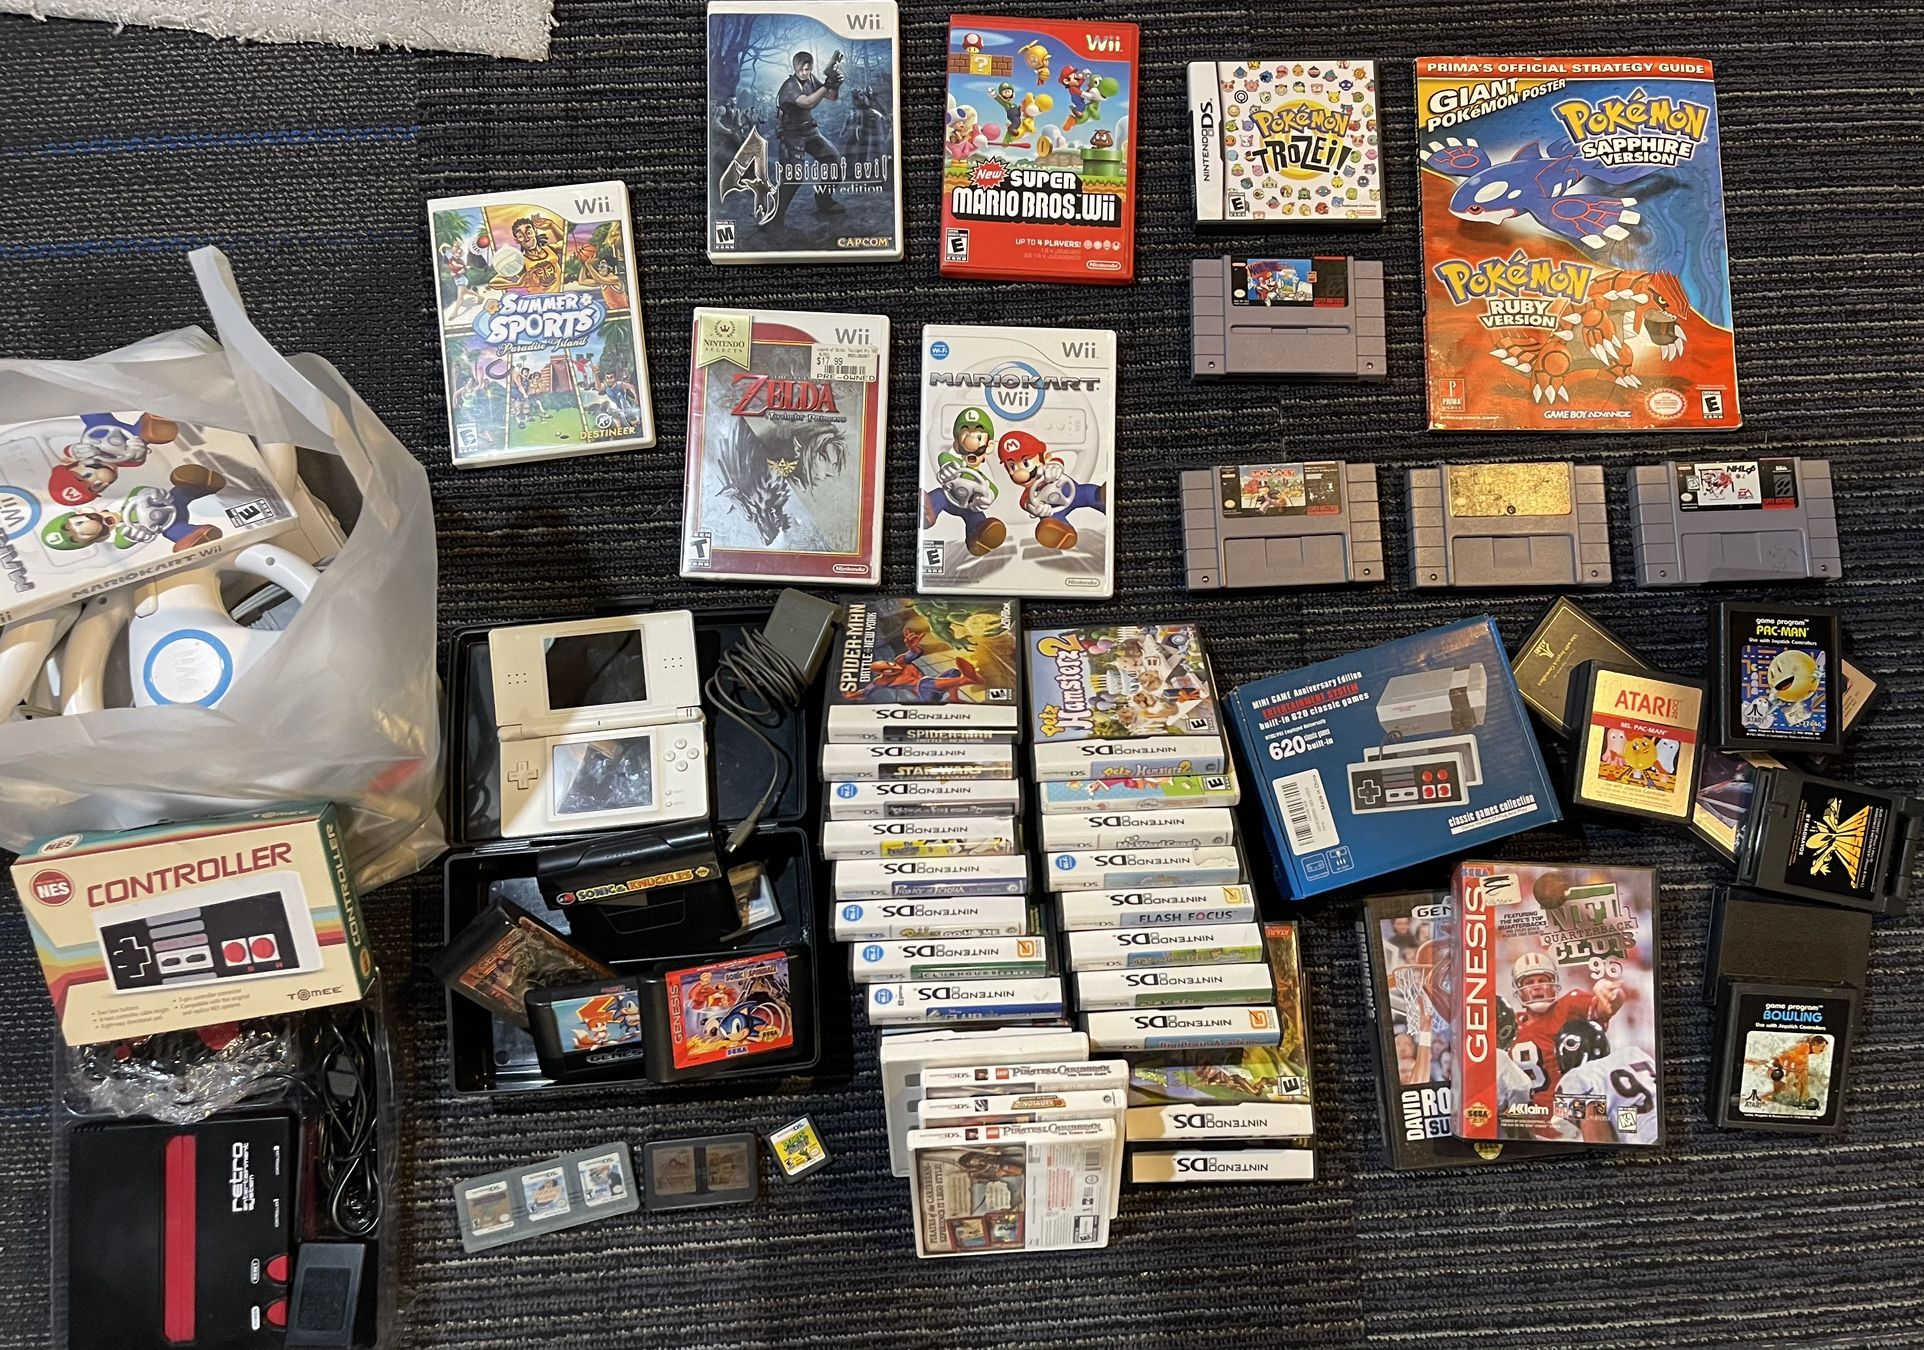 Video Games (mainly Nintendo Stuff) *not free